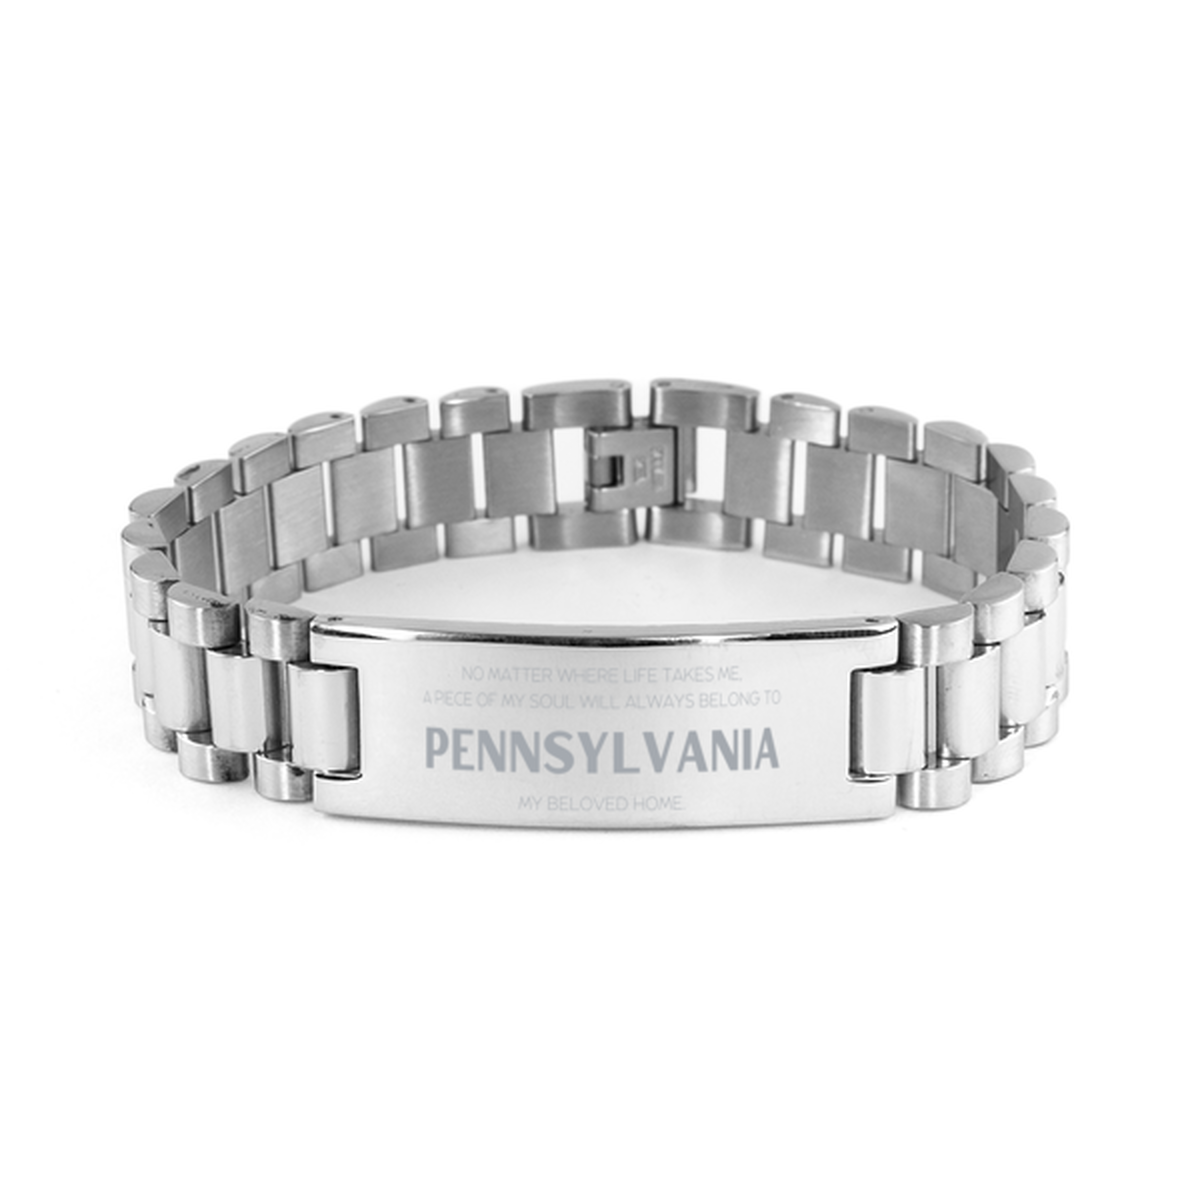 Love Pennsylvania State Gifts, My soul will always belong to Pennsylvania, Proud Ladder Stainless Steel Bracelet, Birthday Unique Gifts For Pennsylvania Men, Women, Friends